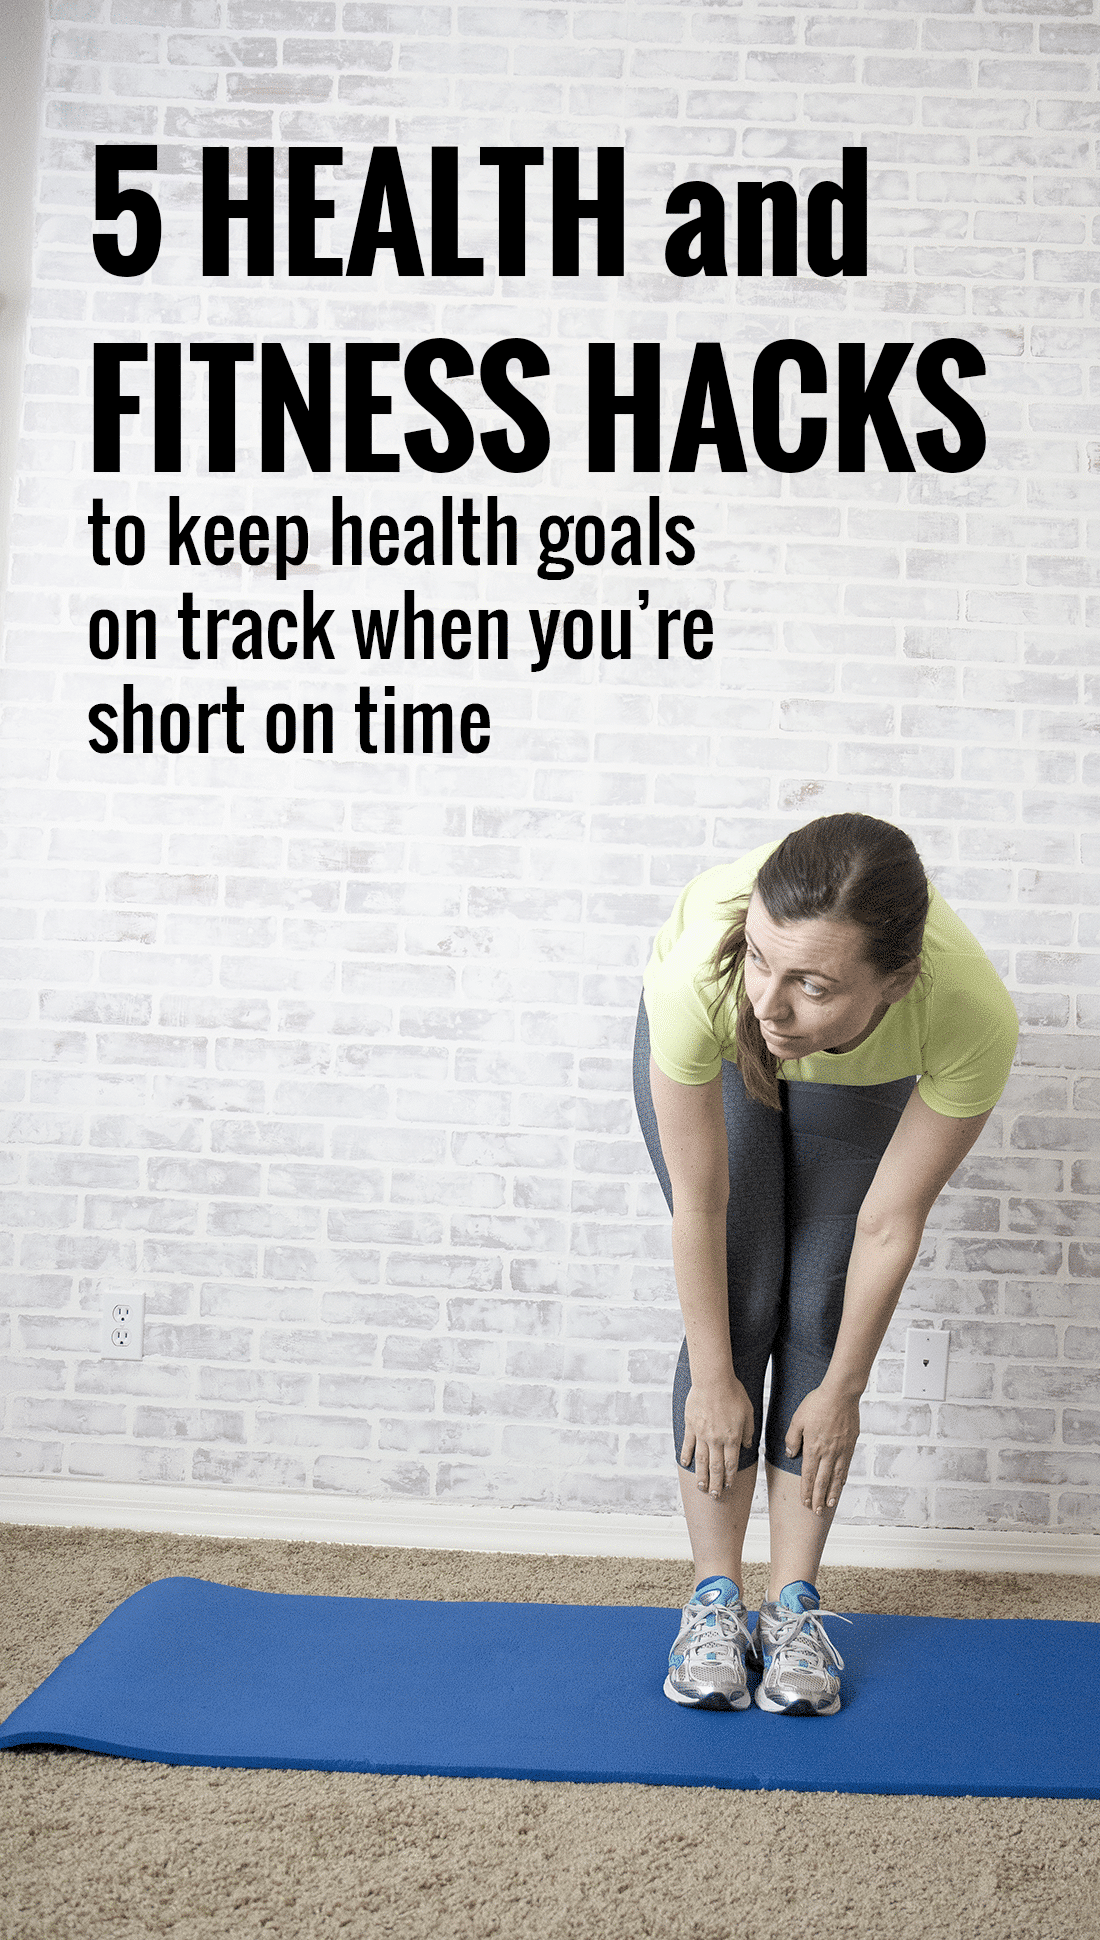 5 Health and Fitness Hacks to Stay on Track with Resolutions During Your Busiest Weeks